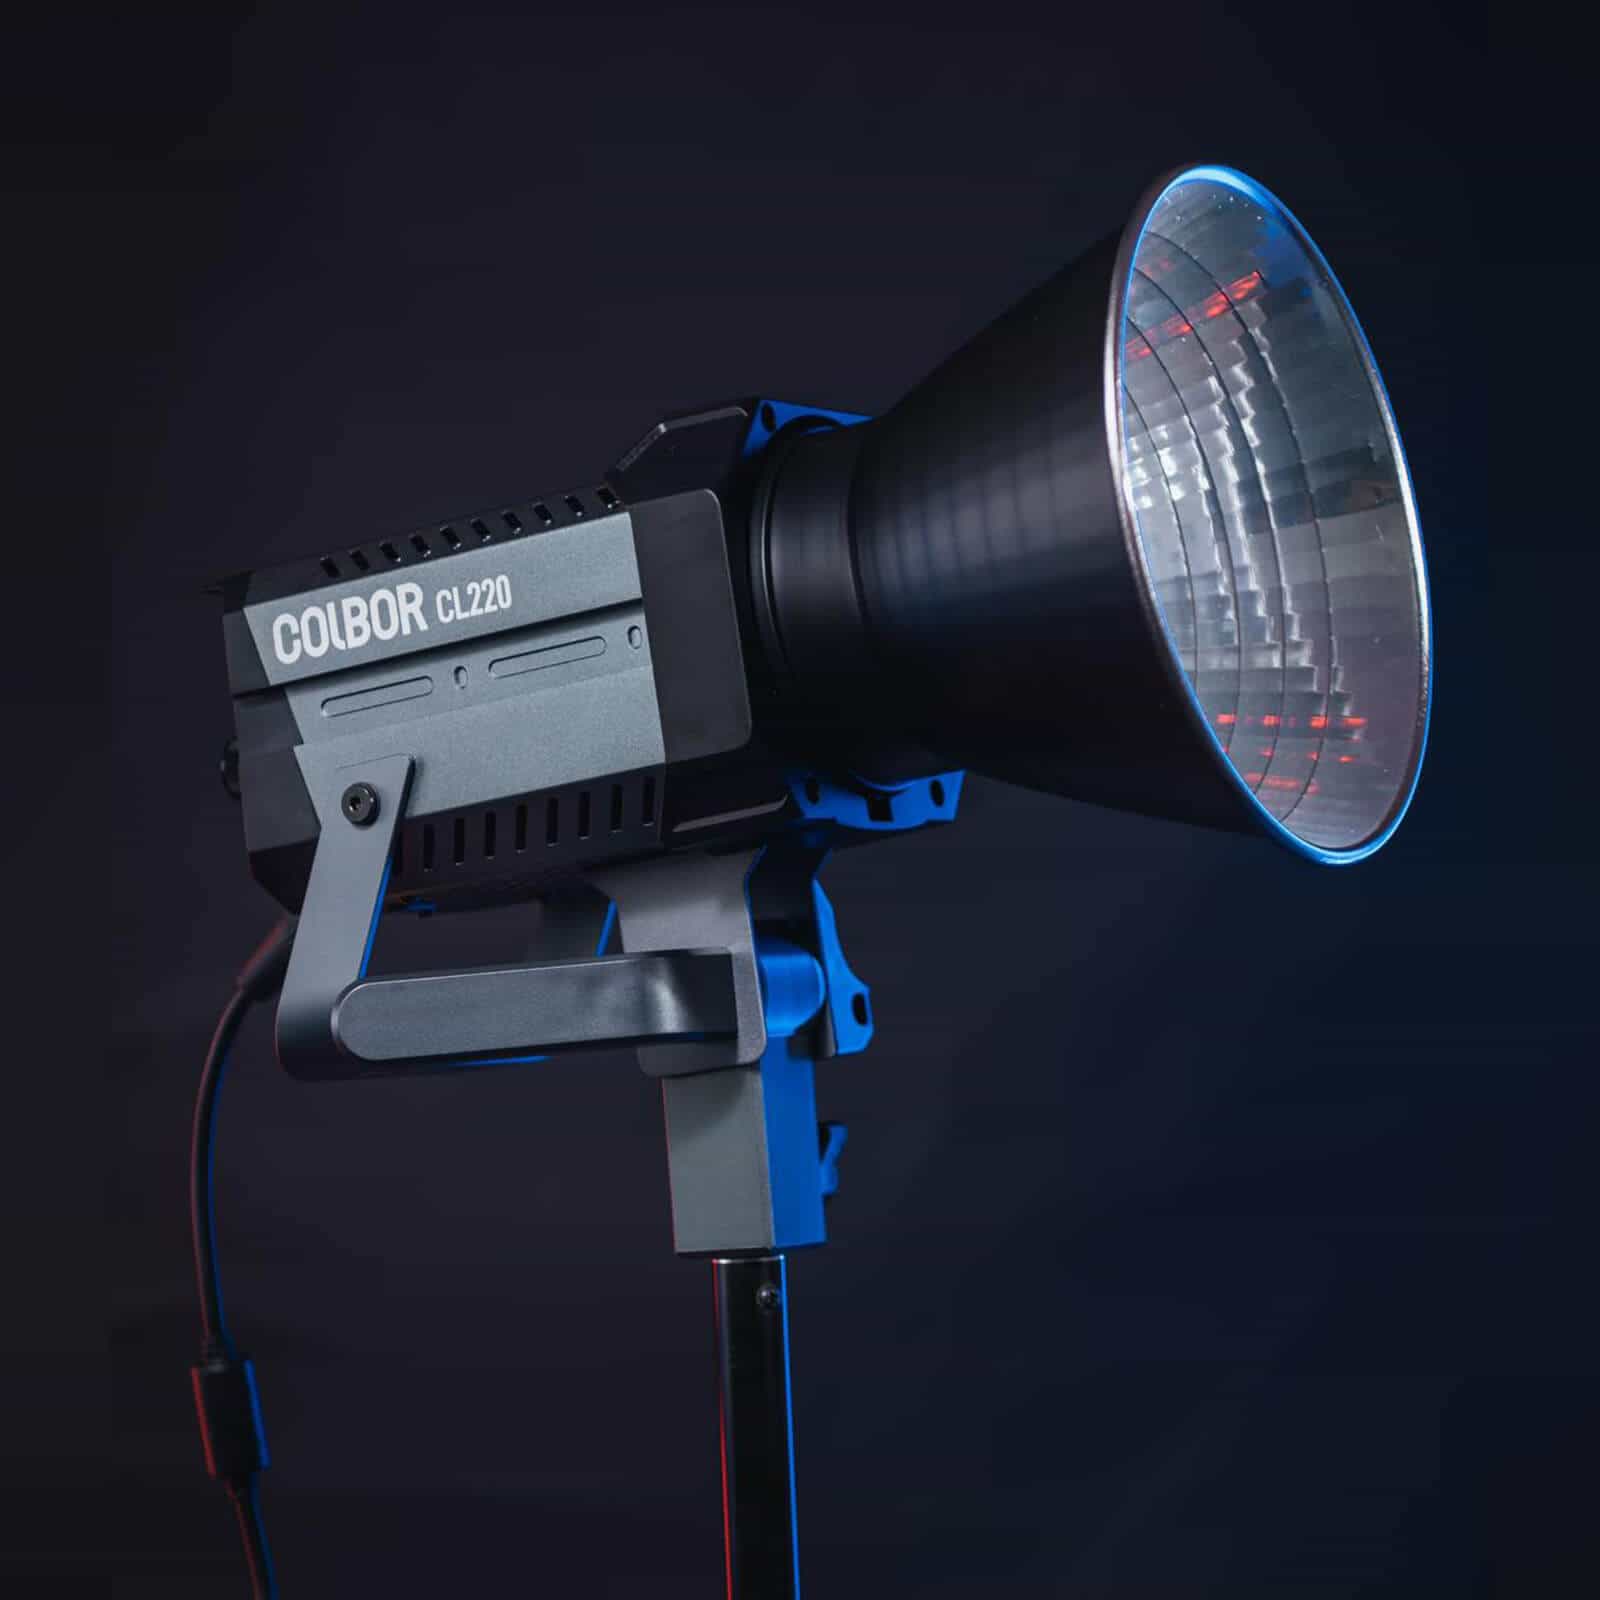 COLBOR BHR45 is mounted on the COLBOR CL220 light.